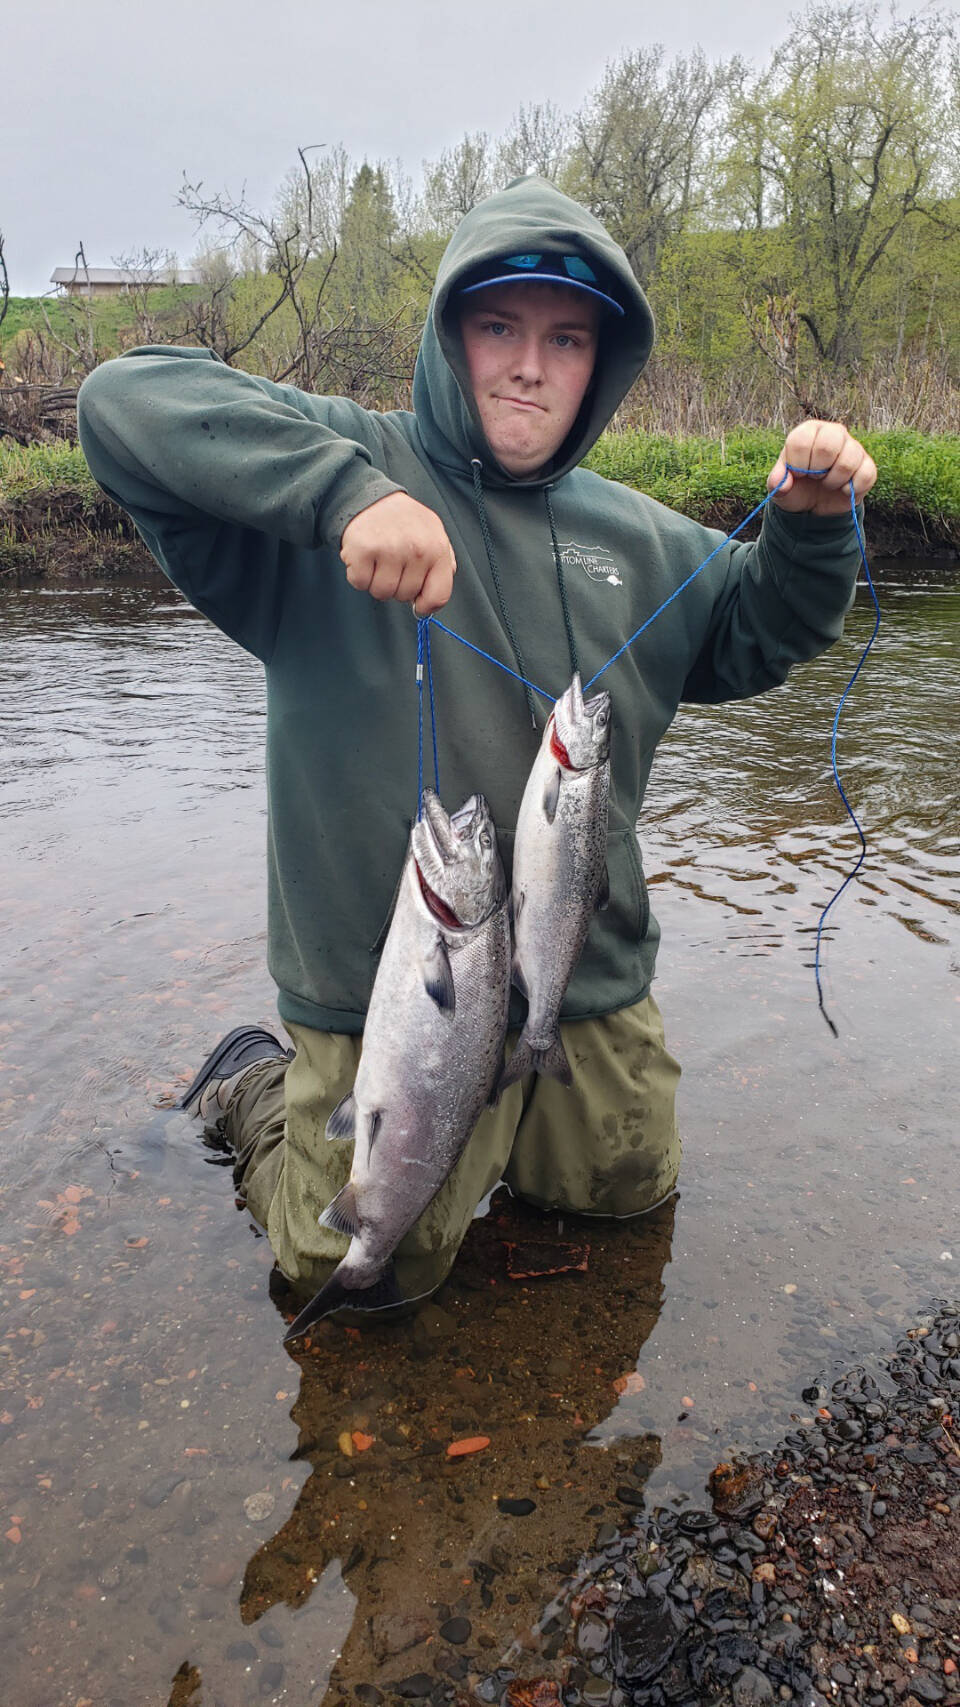 Hunter Kirby holds up the hatchery king salmon he bagged during the one-day youth fishery on the Ninilchik River on Wednesday, June 7, 2023 in Ninilchik, Alaska. Photo by Mike Booz